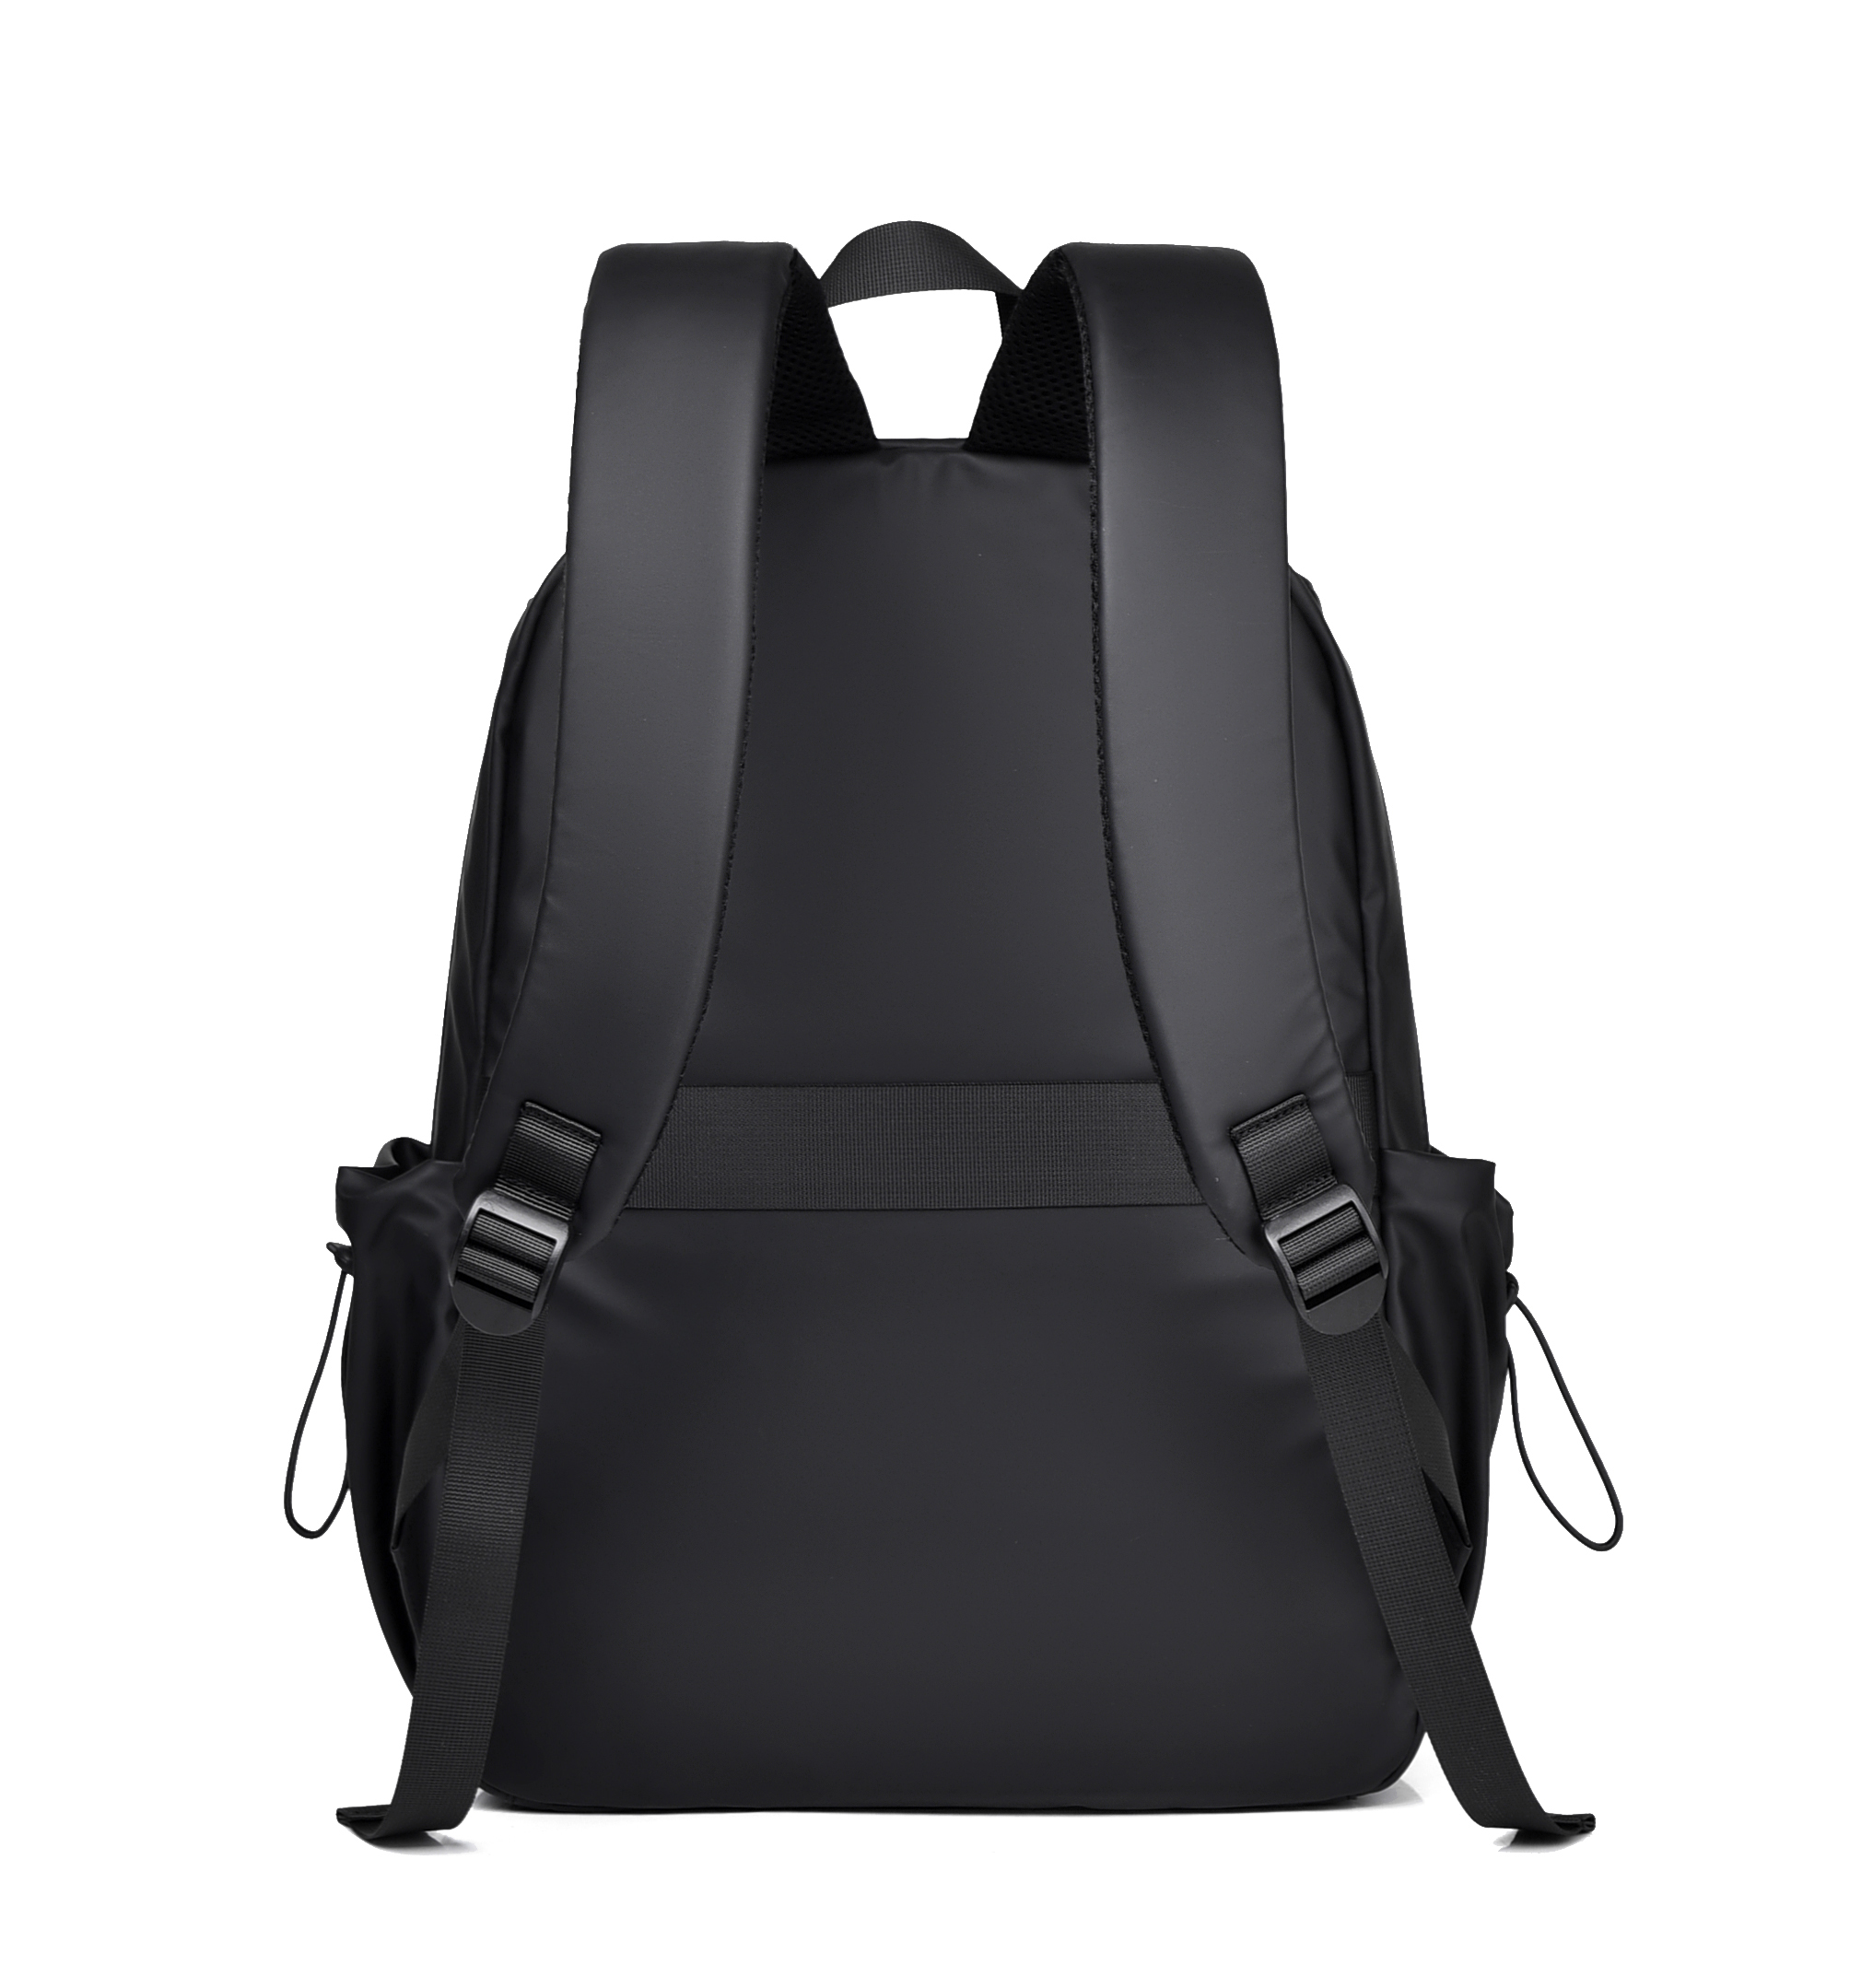 School Bags For College Students Backpack School Bags For Men Book Bags Backpack School(图6)